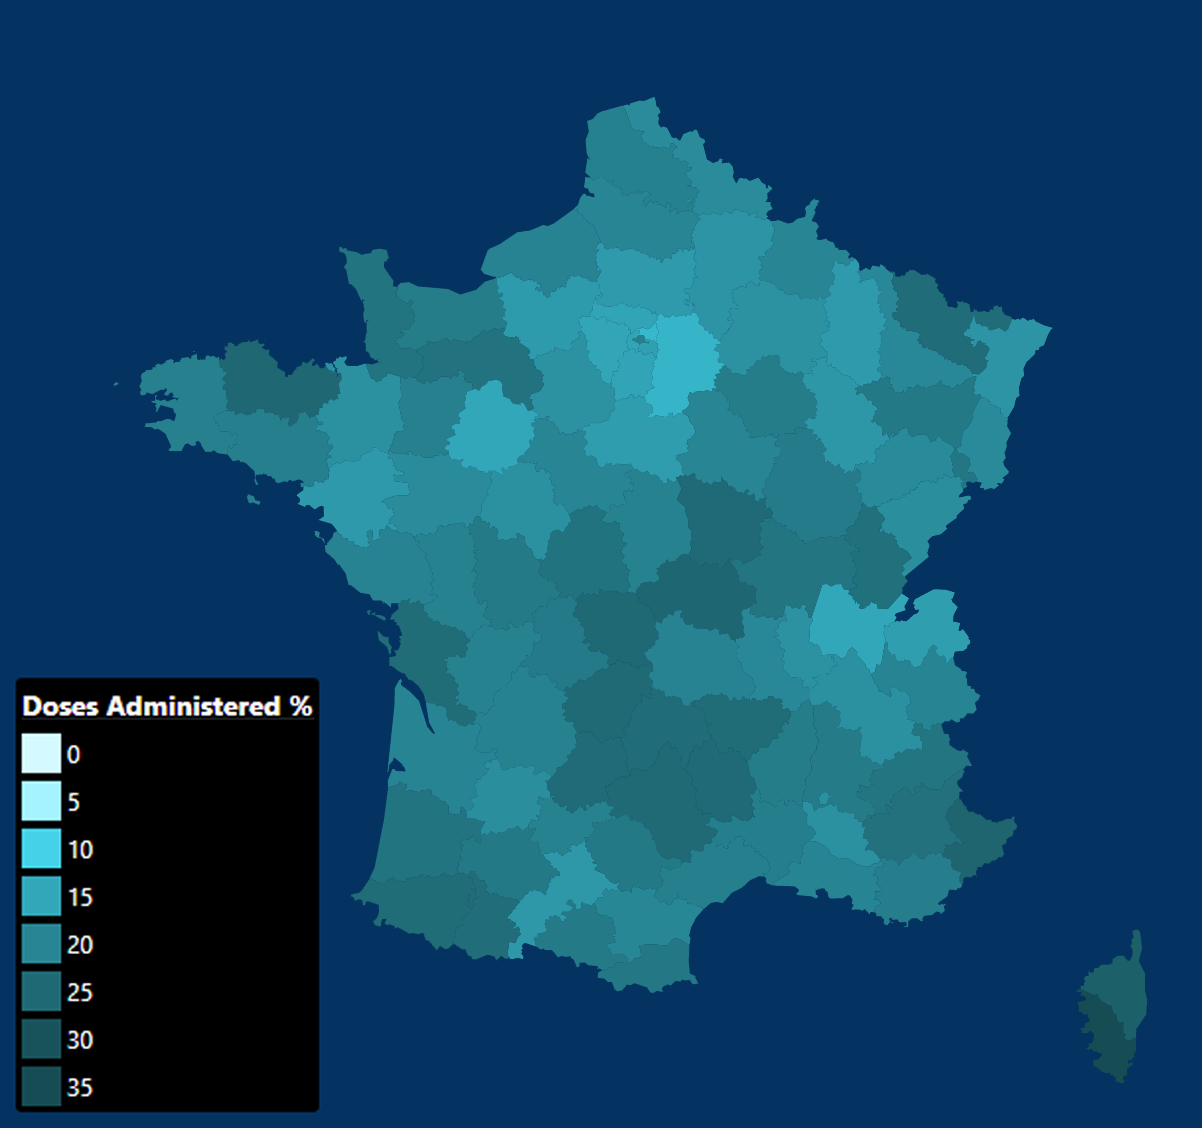 Covid 19 Vaccination Map of France